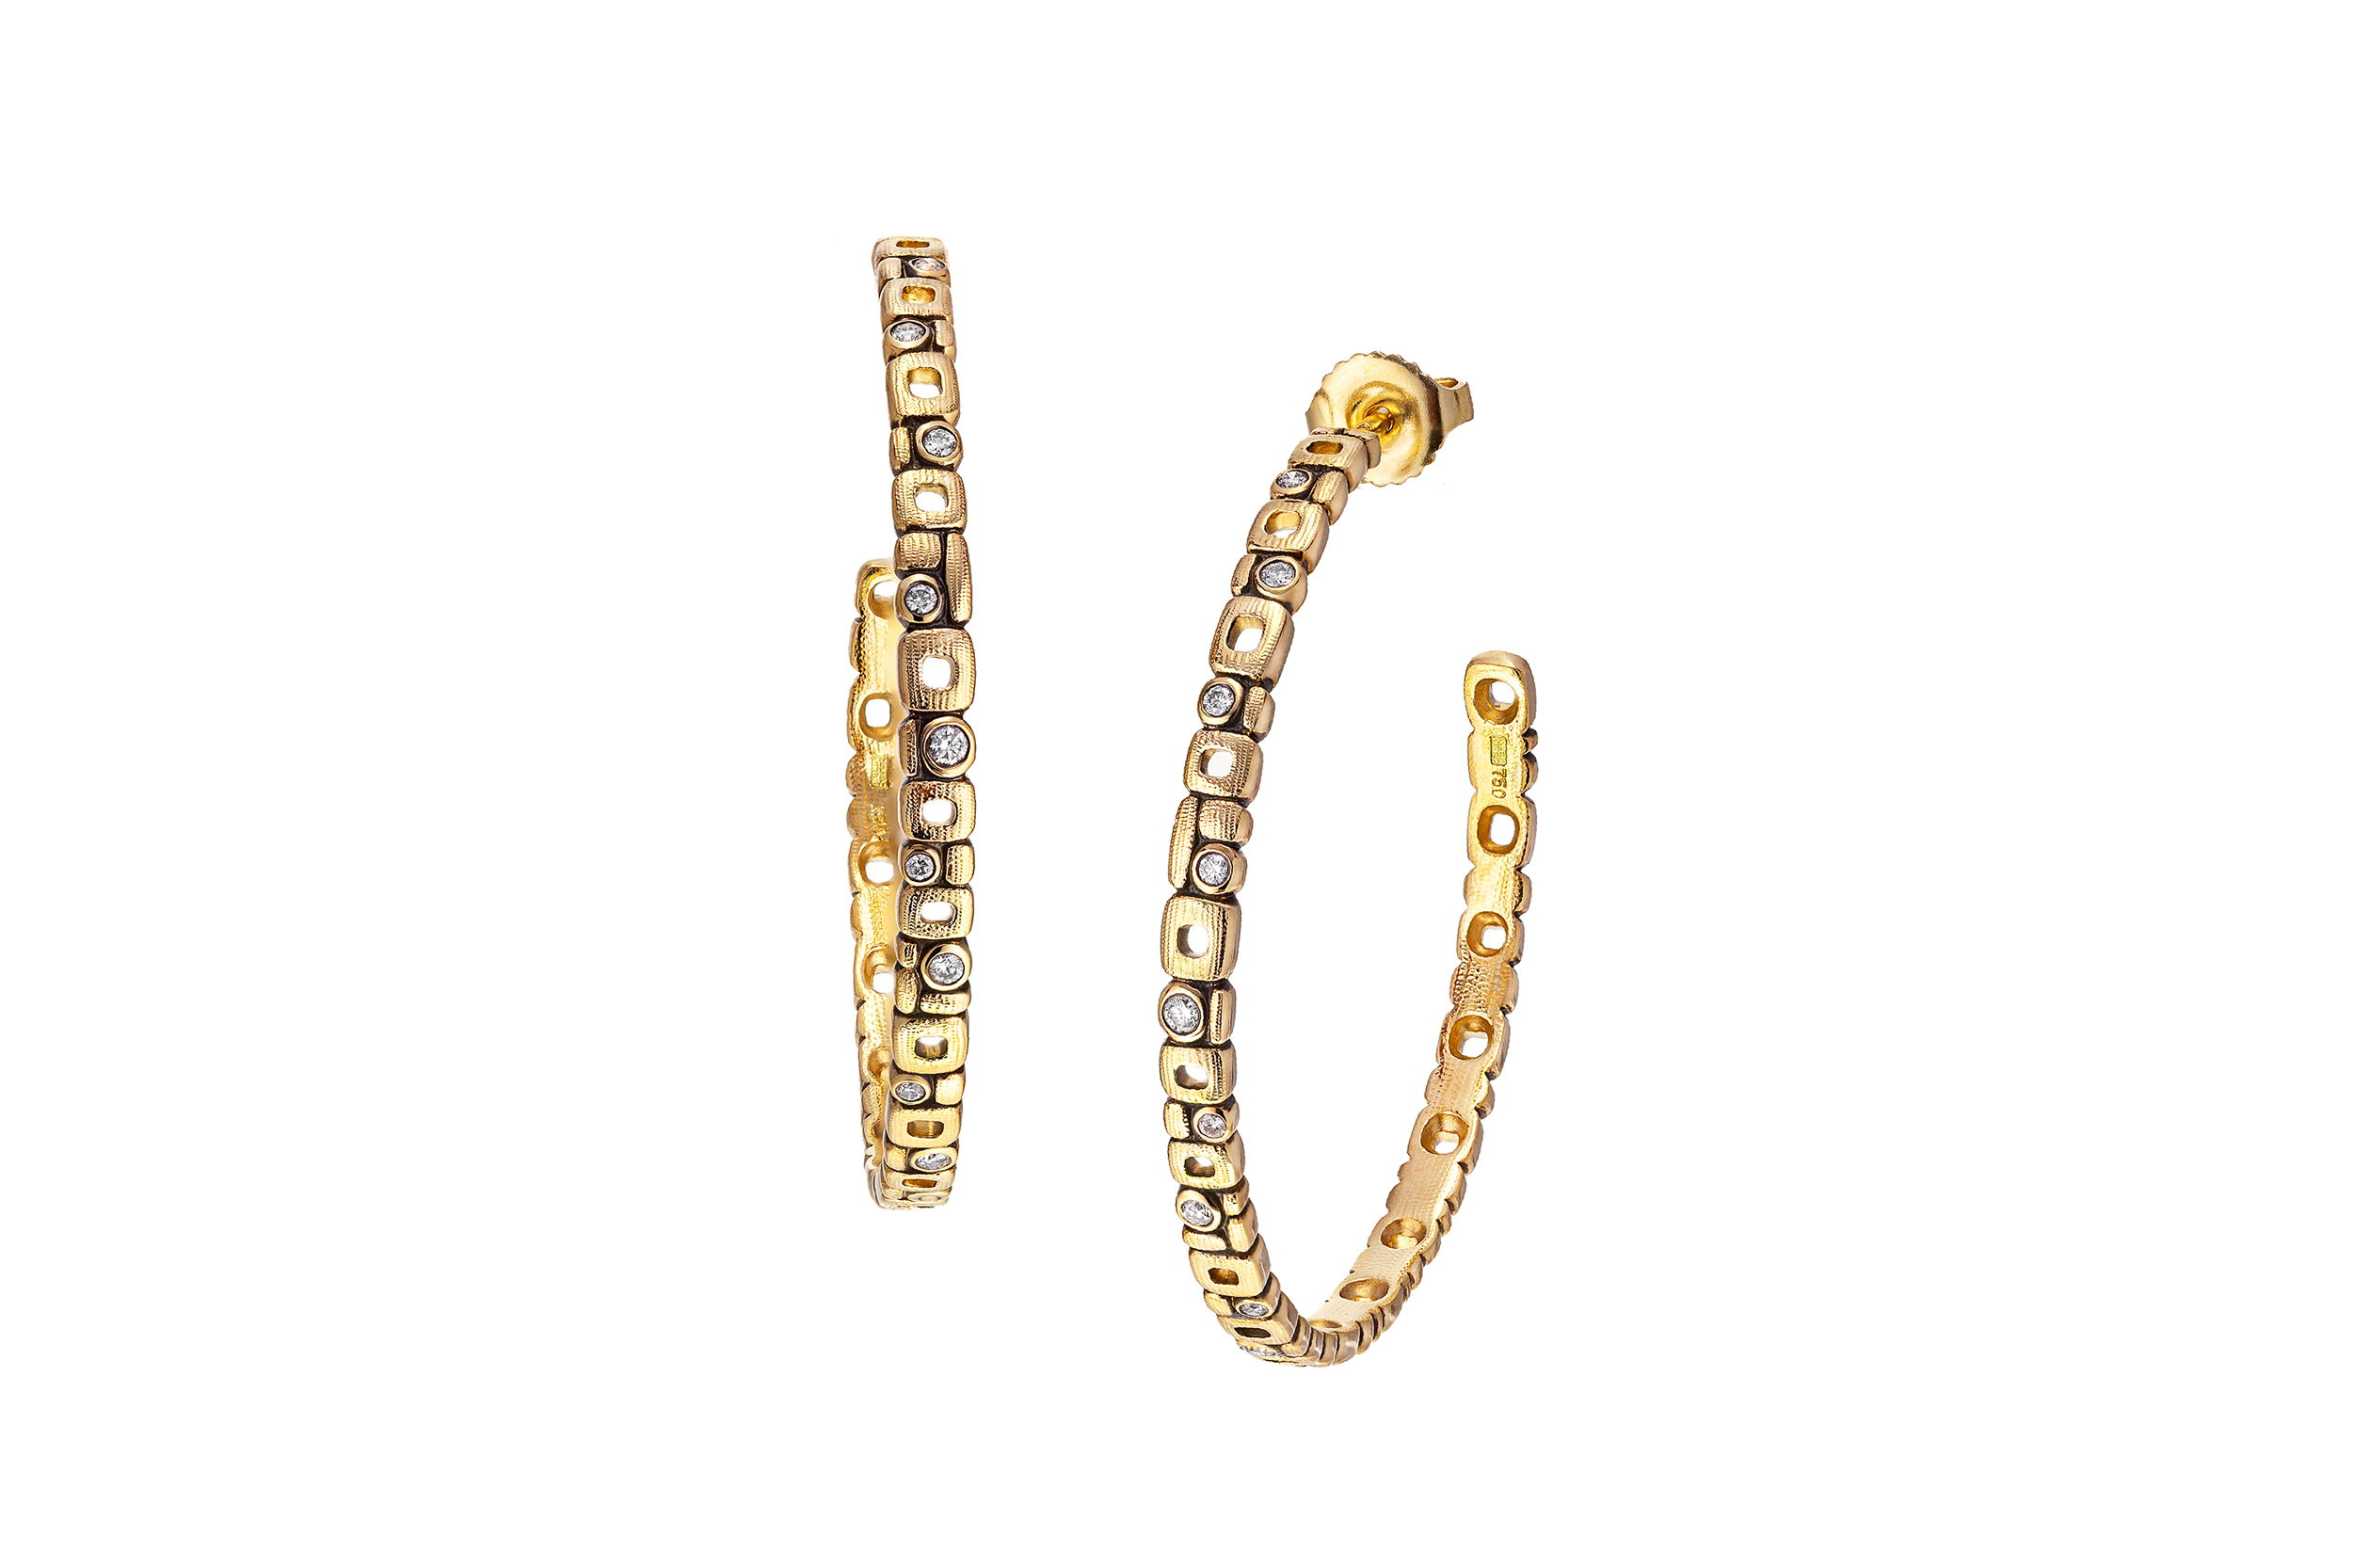 Micro Windows Large Hoop Earrings with White Diamonds in 18kt Yellow Gold